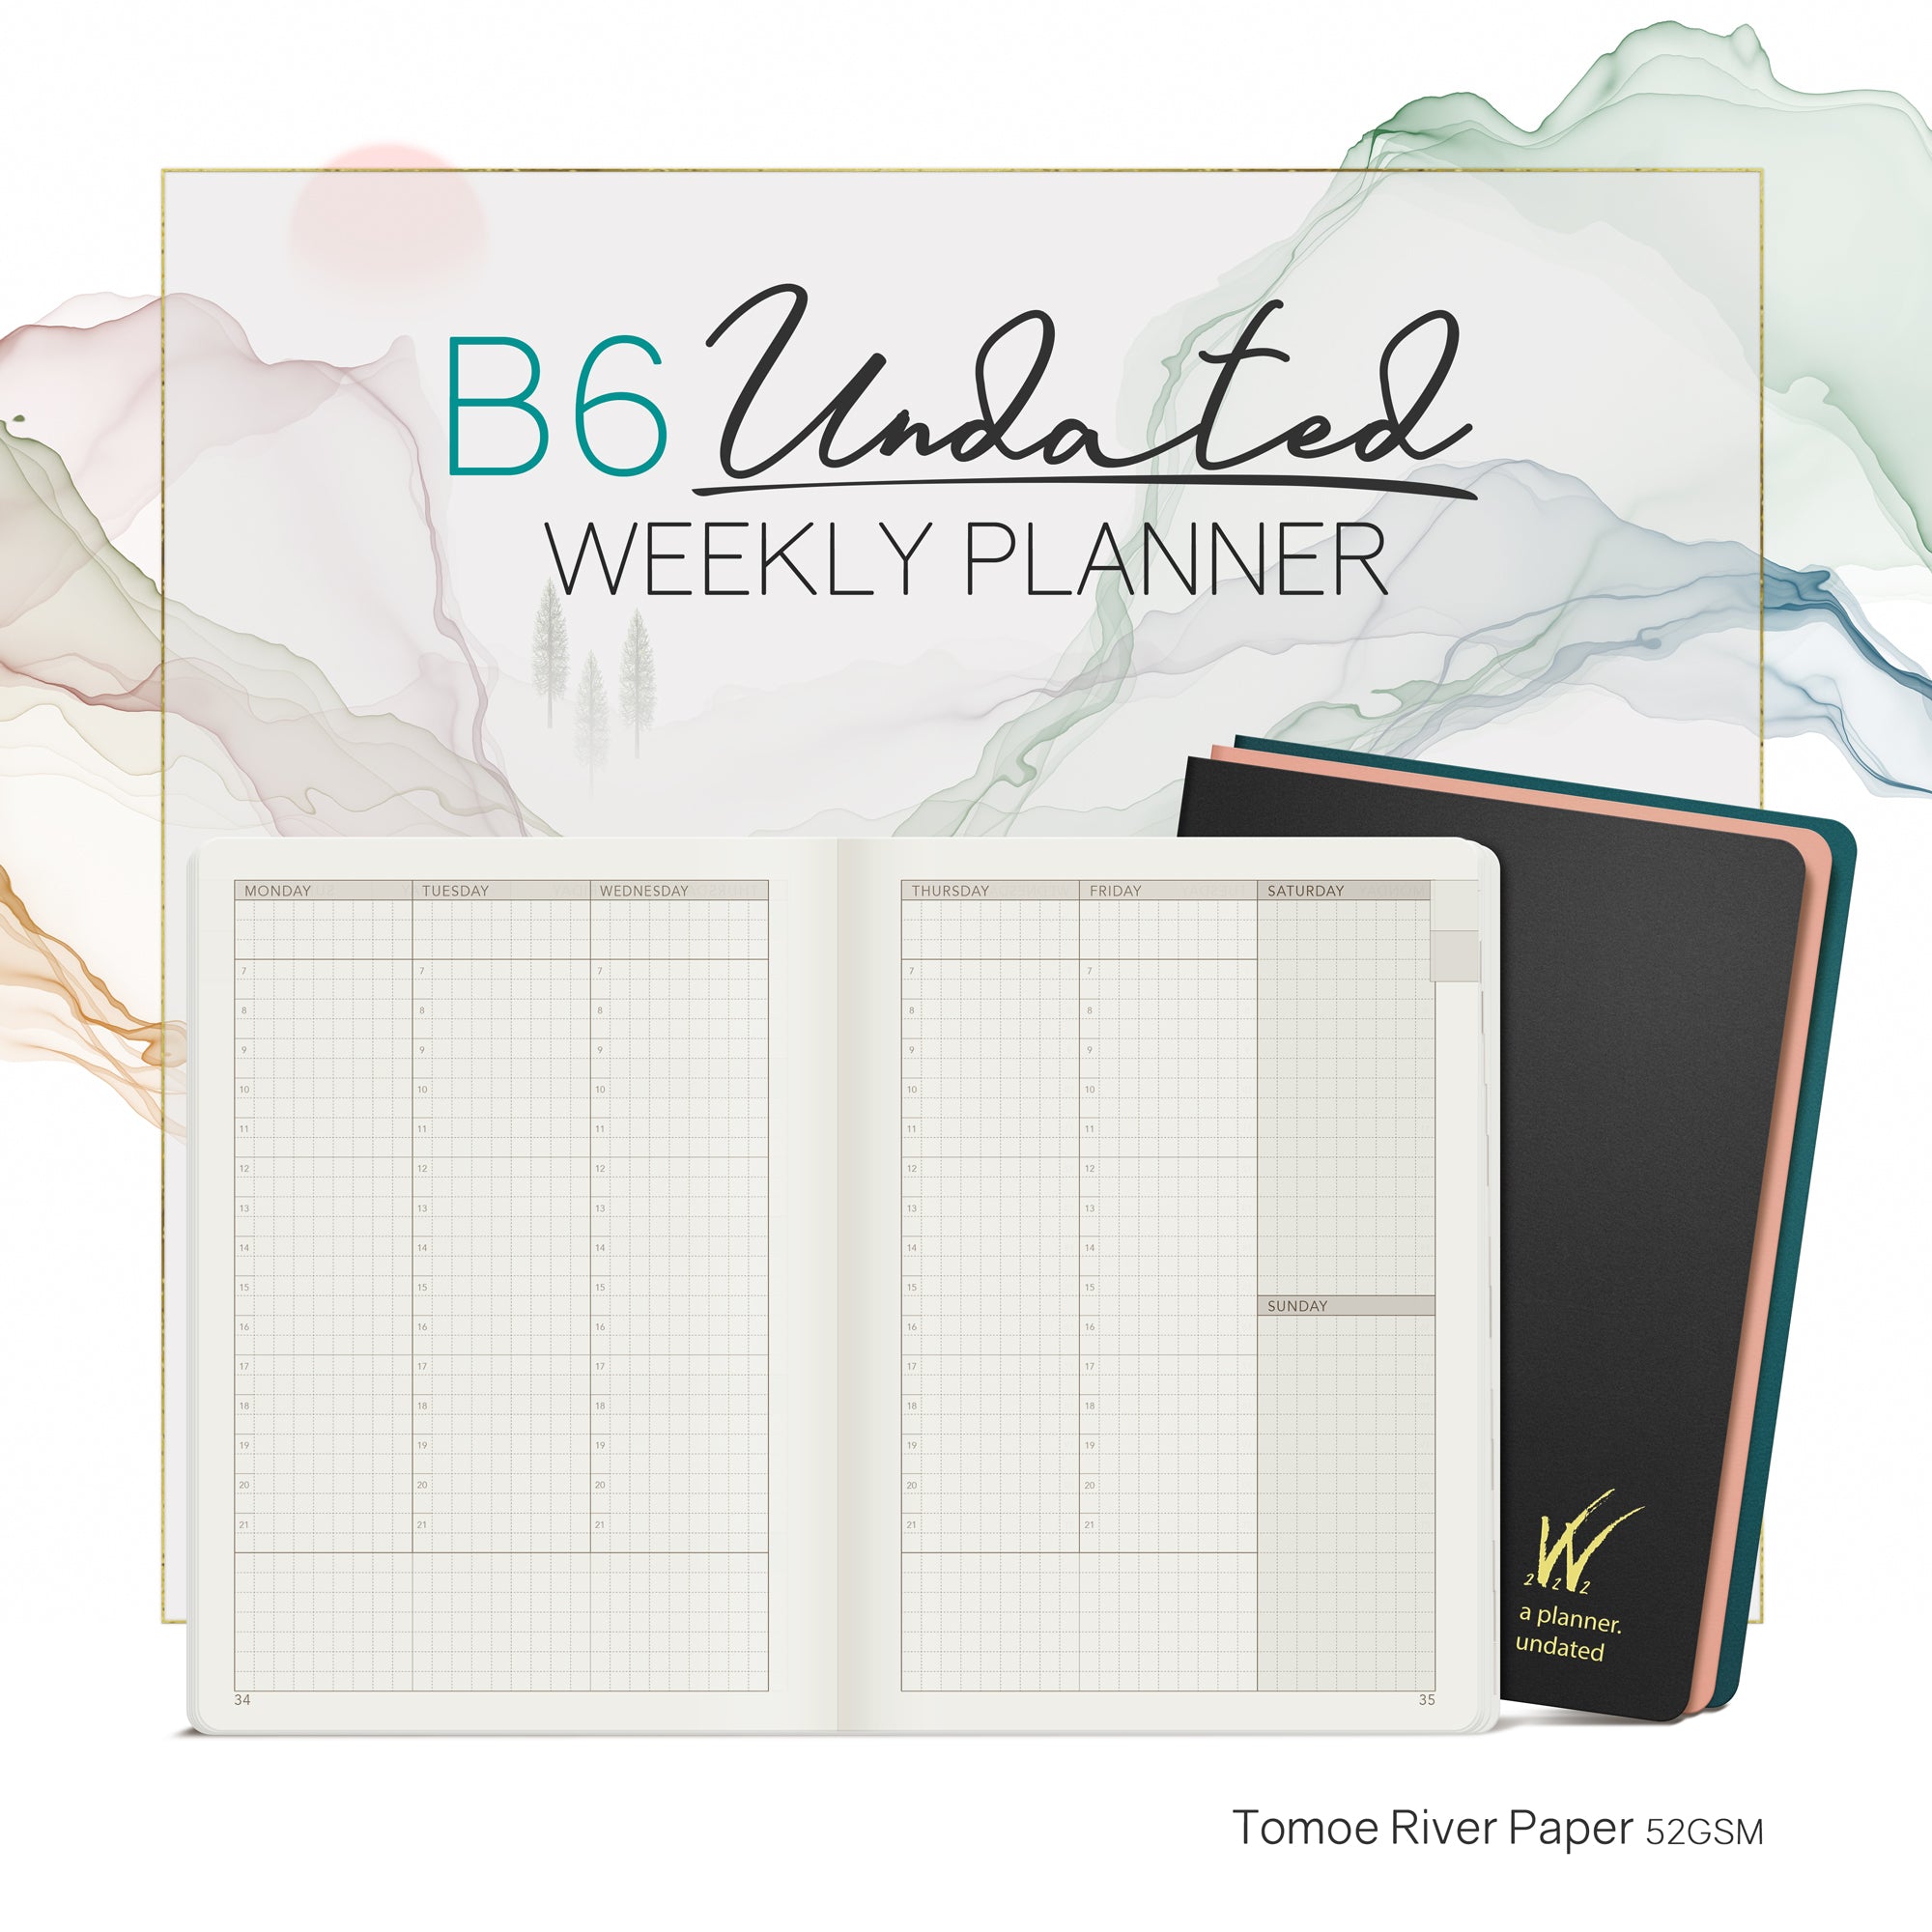 B6 Undated Weekly Planner - 2022 Edition